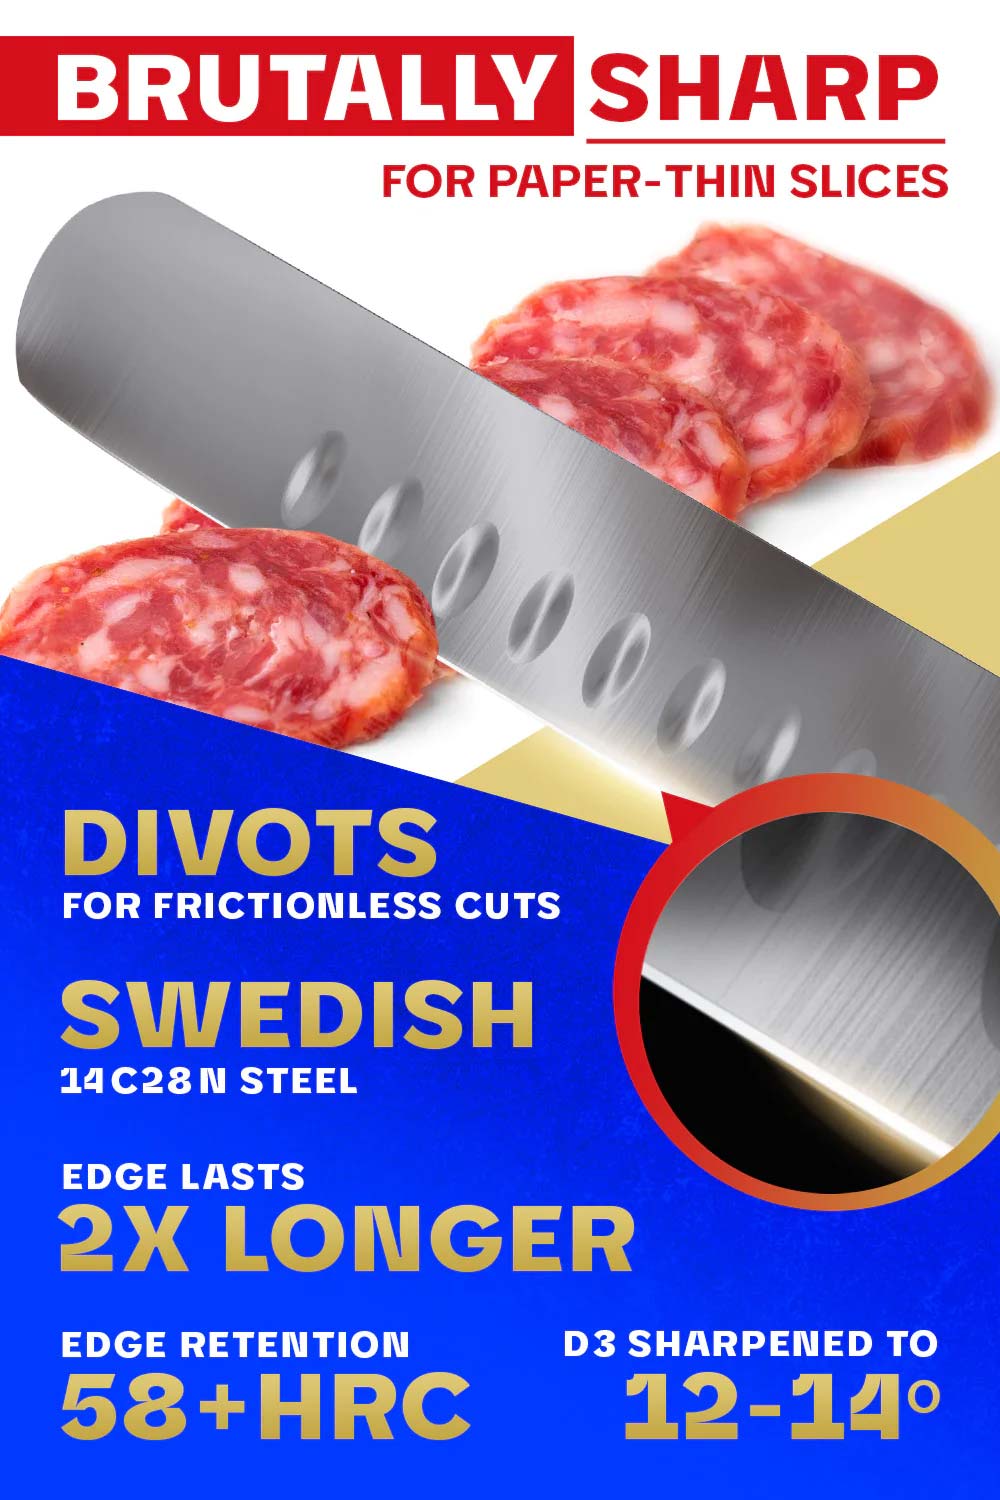 What is the Best Knife for Cutting Meat? – Dalstrong